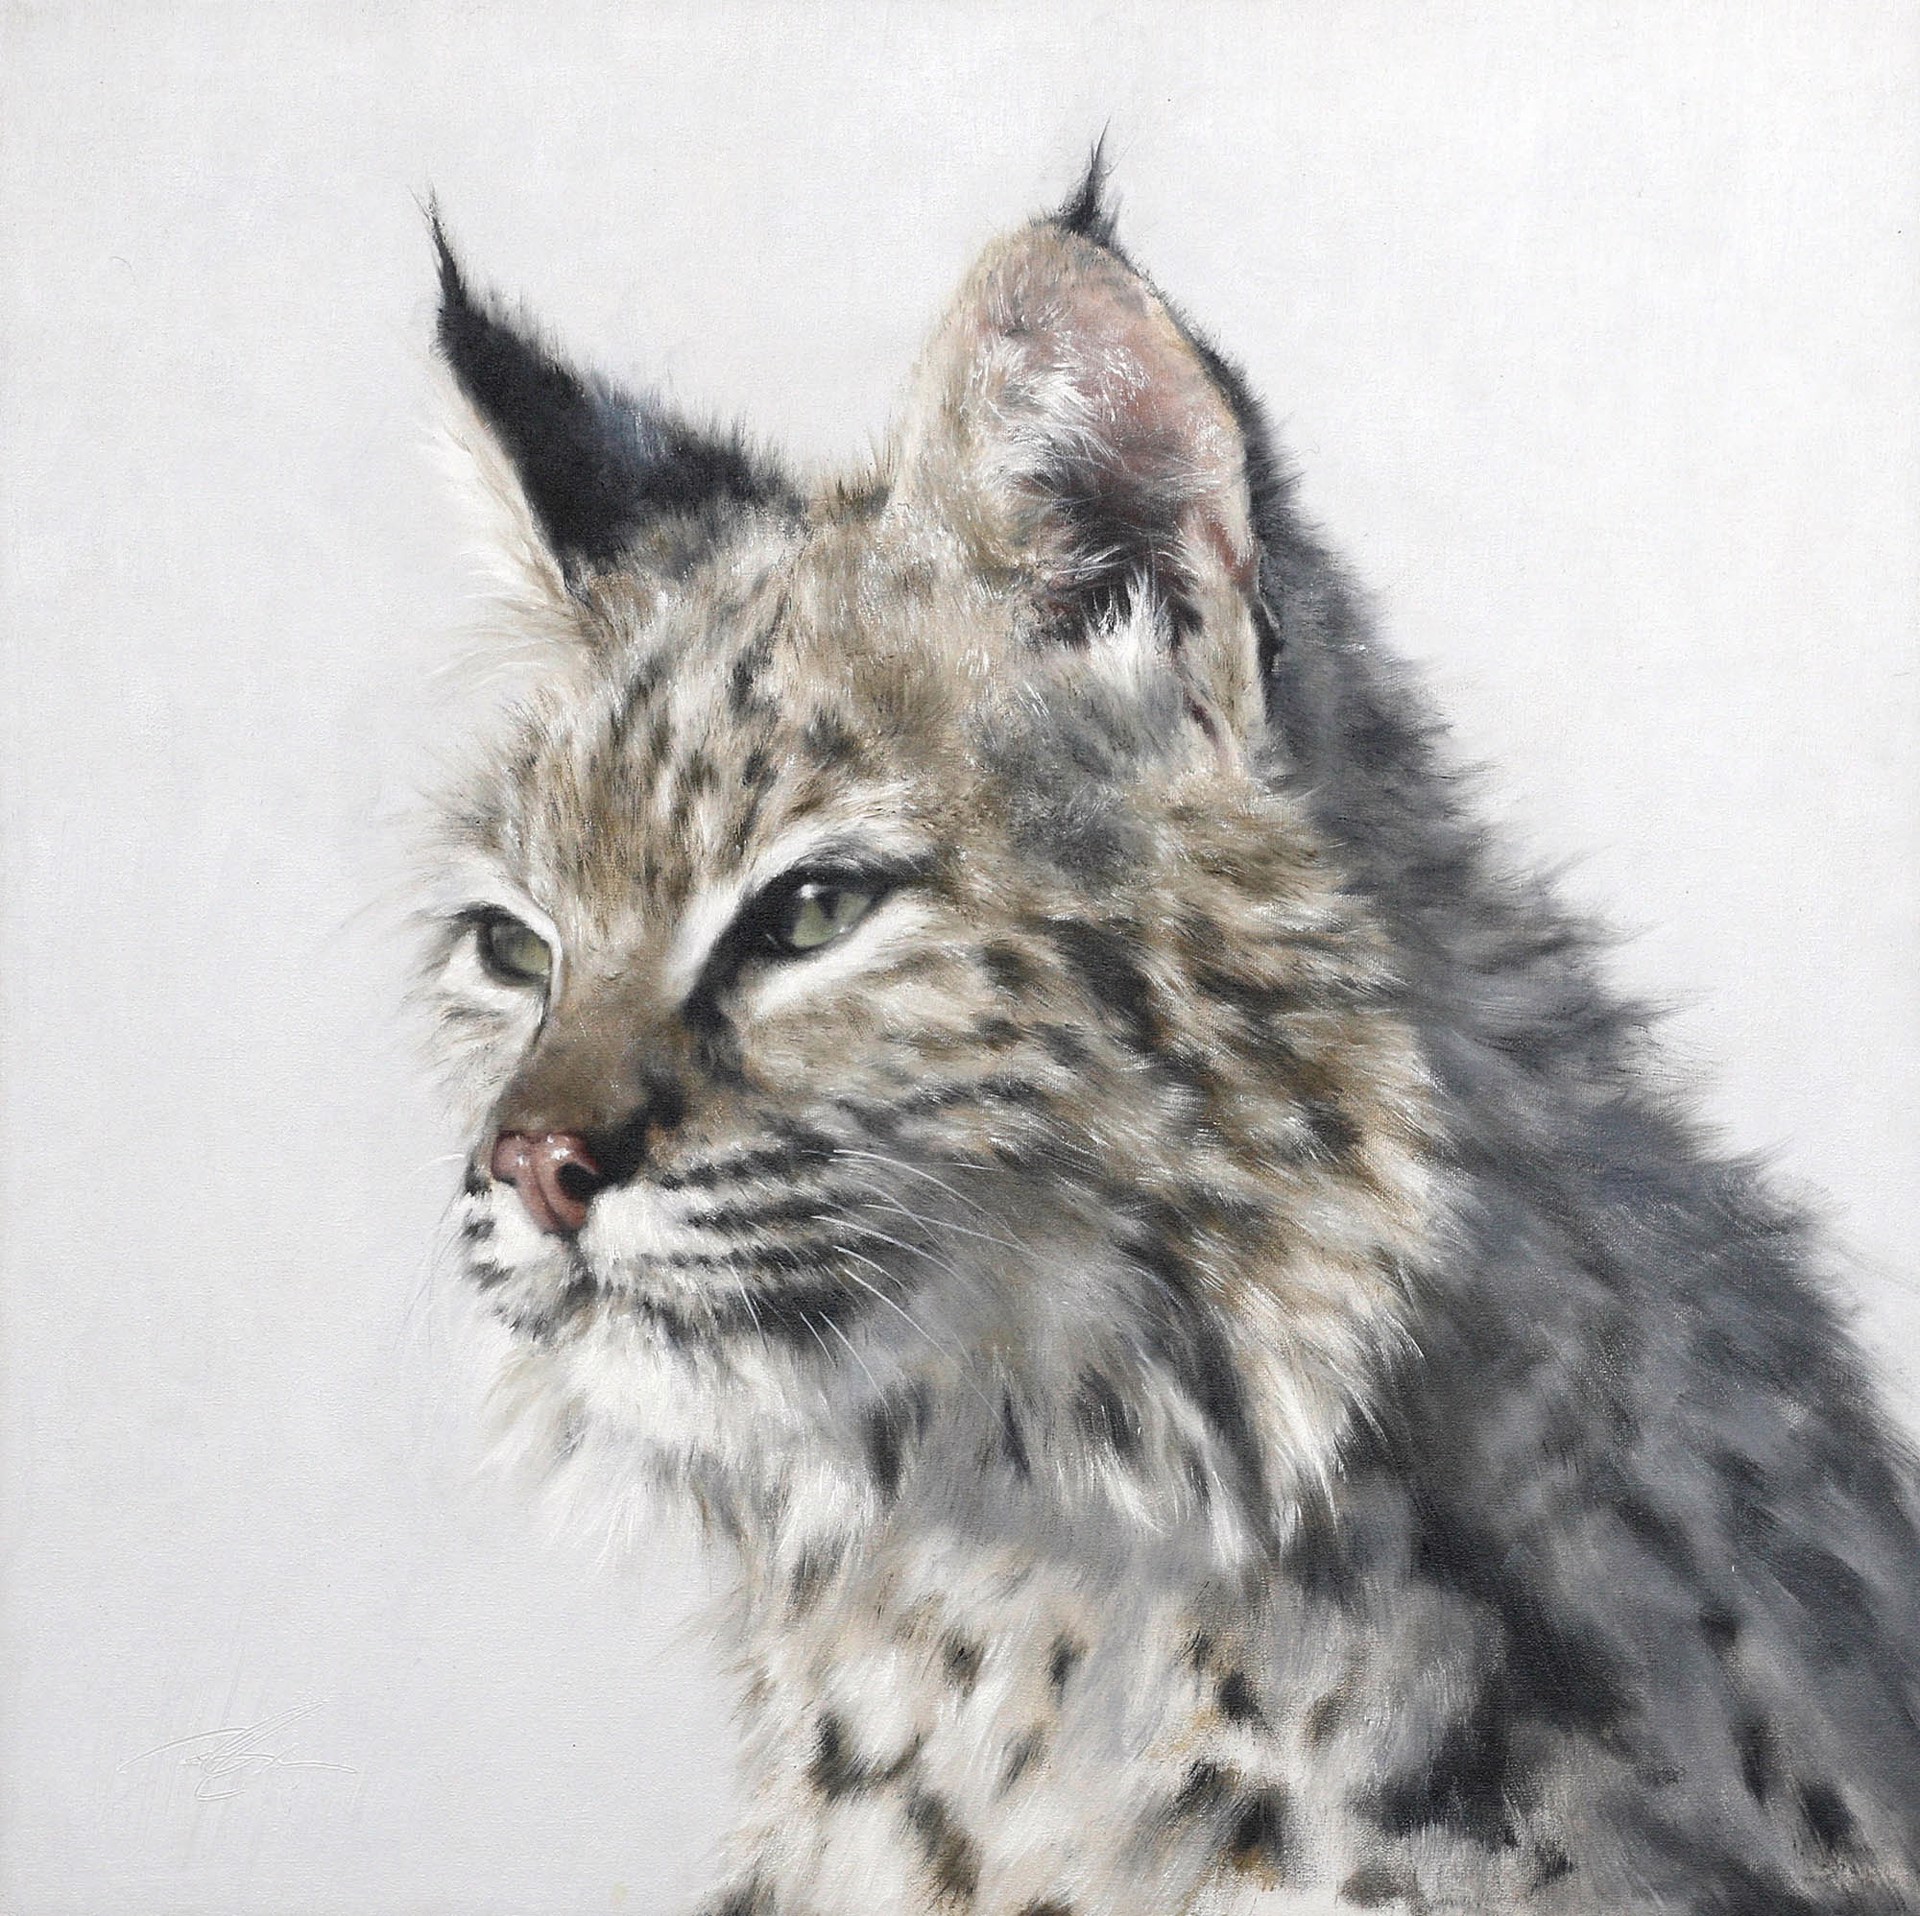 Original Oil Painting Featuring A Bobcat Portrait With White Background